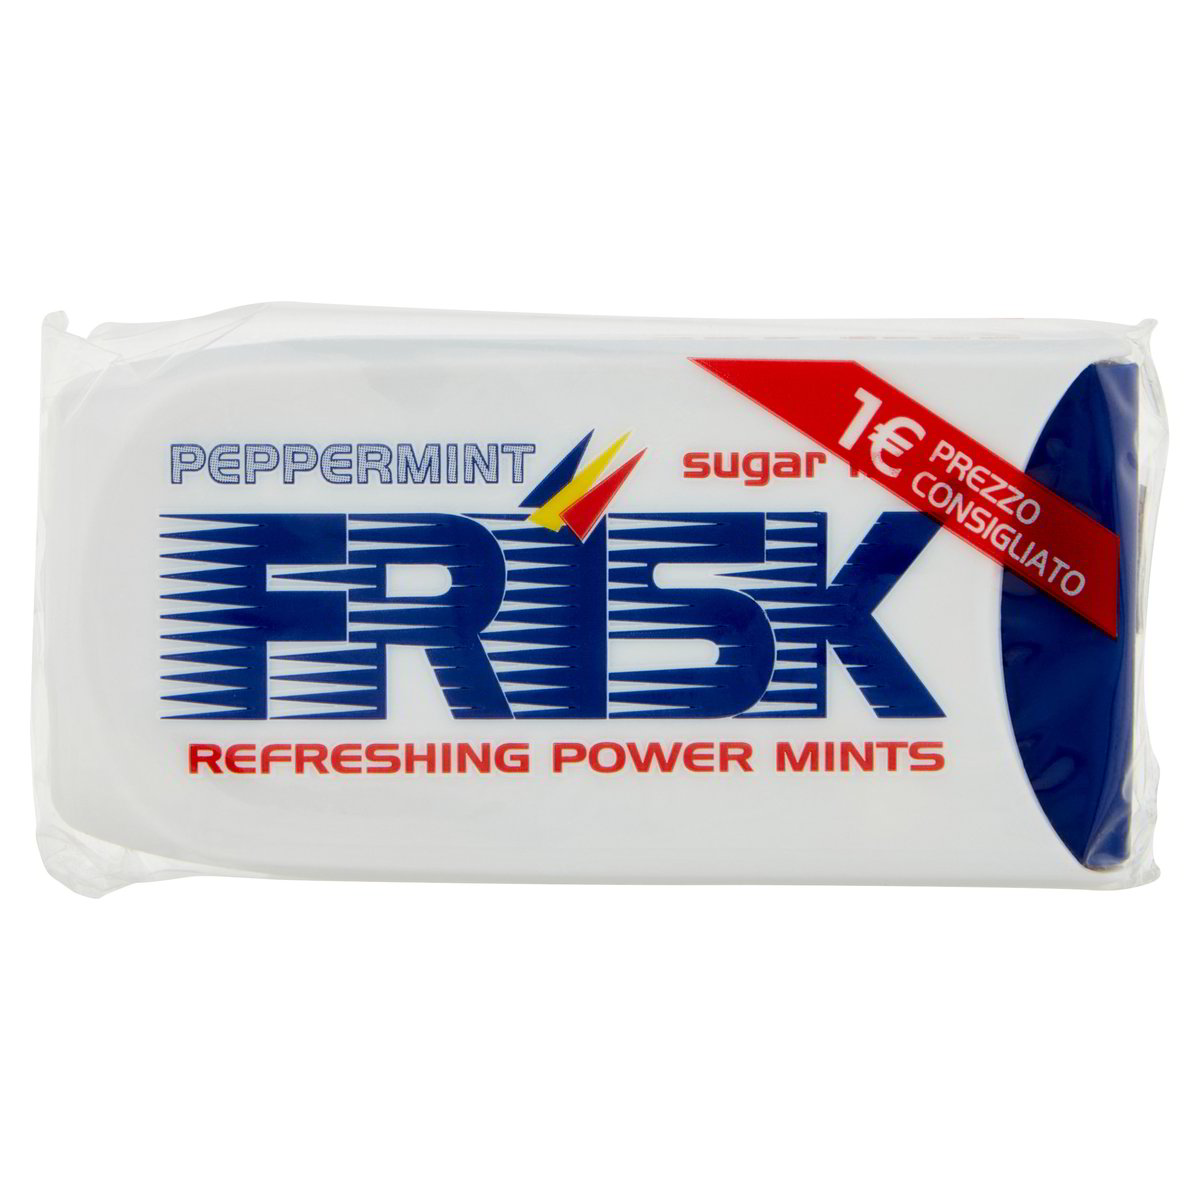 Refreshing Power Mints Peppermint